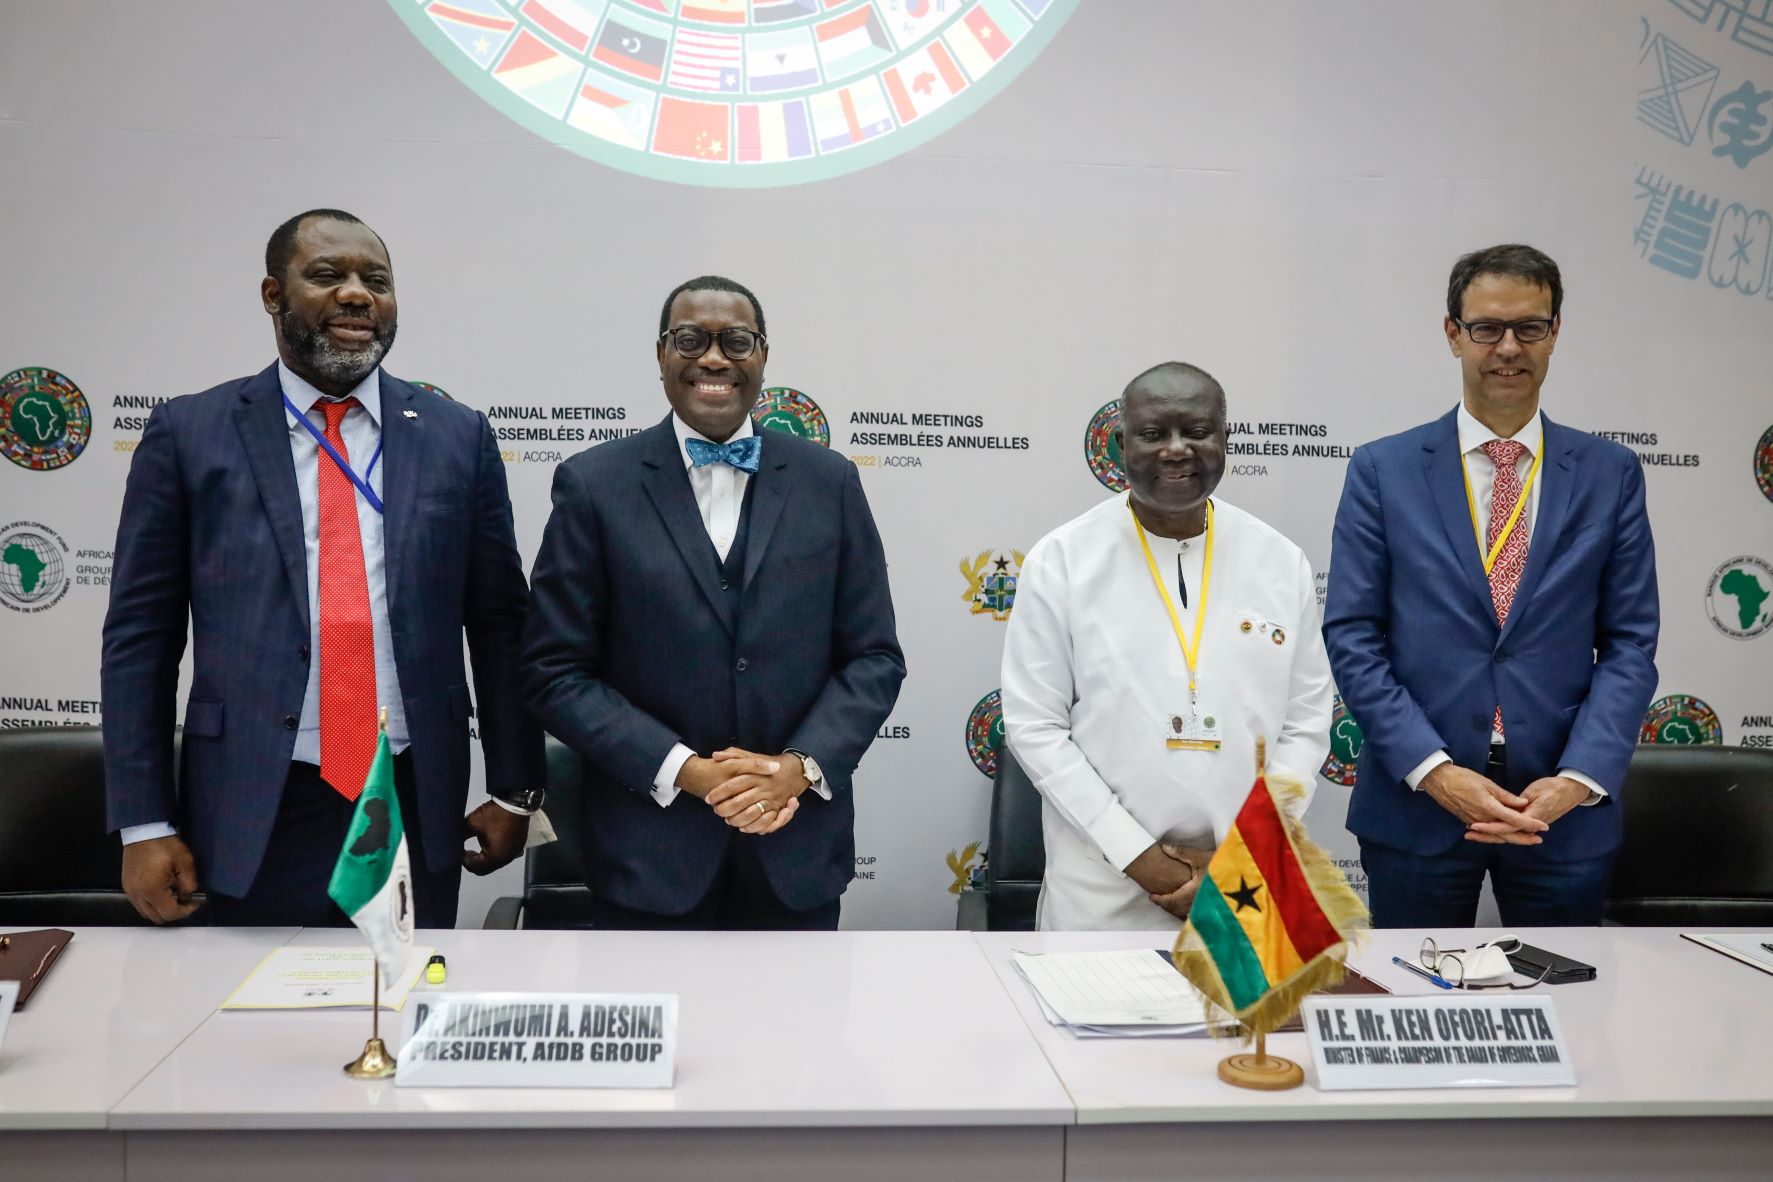 Ghana signs agreement with ADF, Switzerland, for grids, solar metering